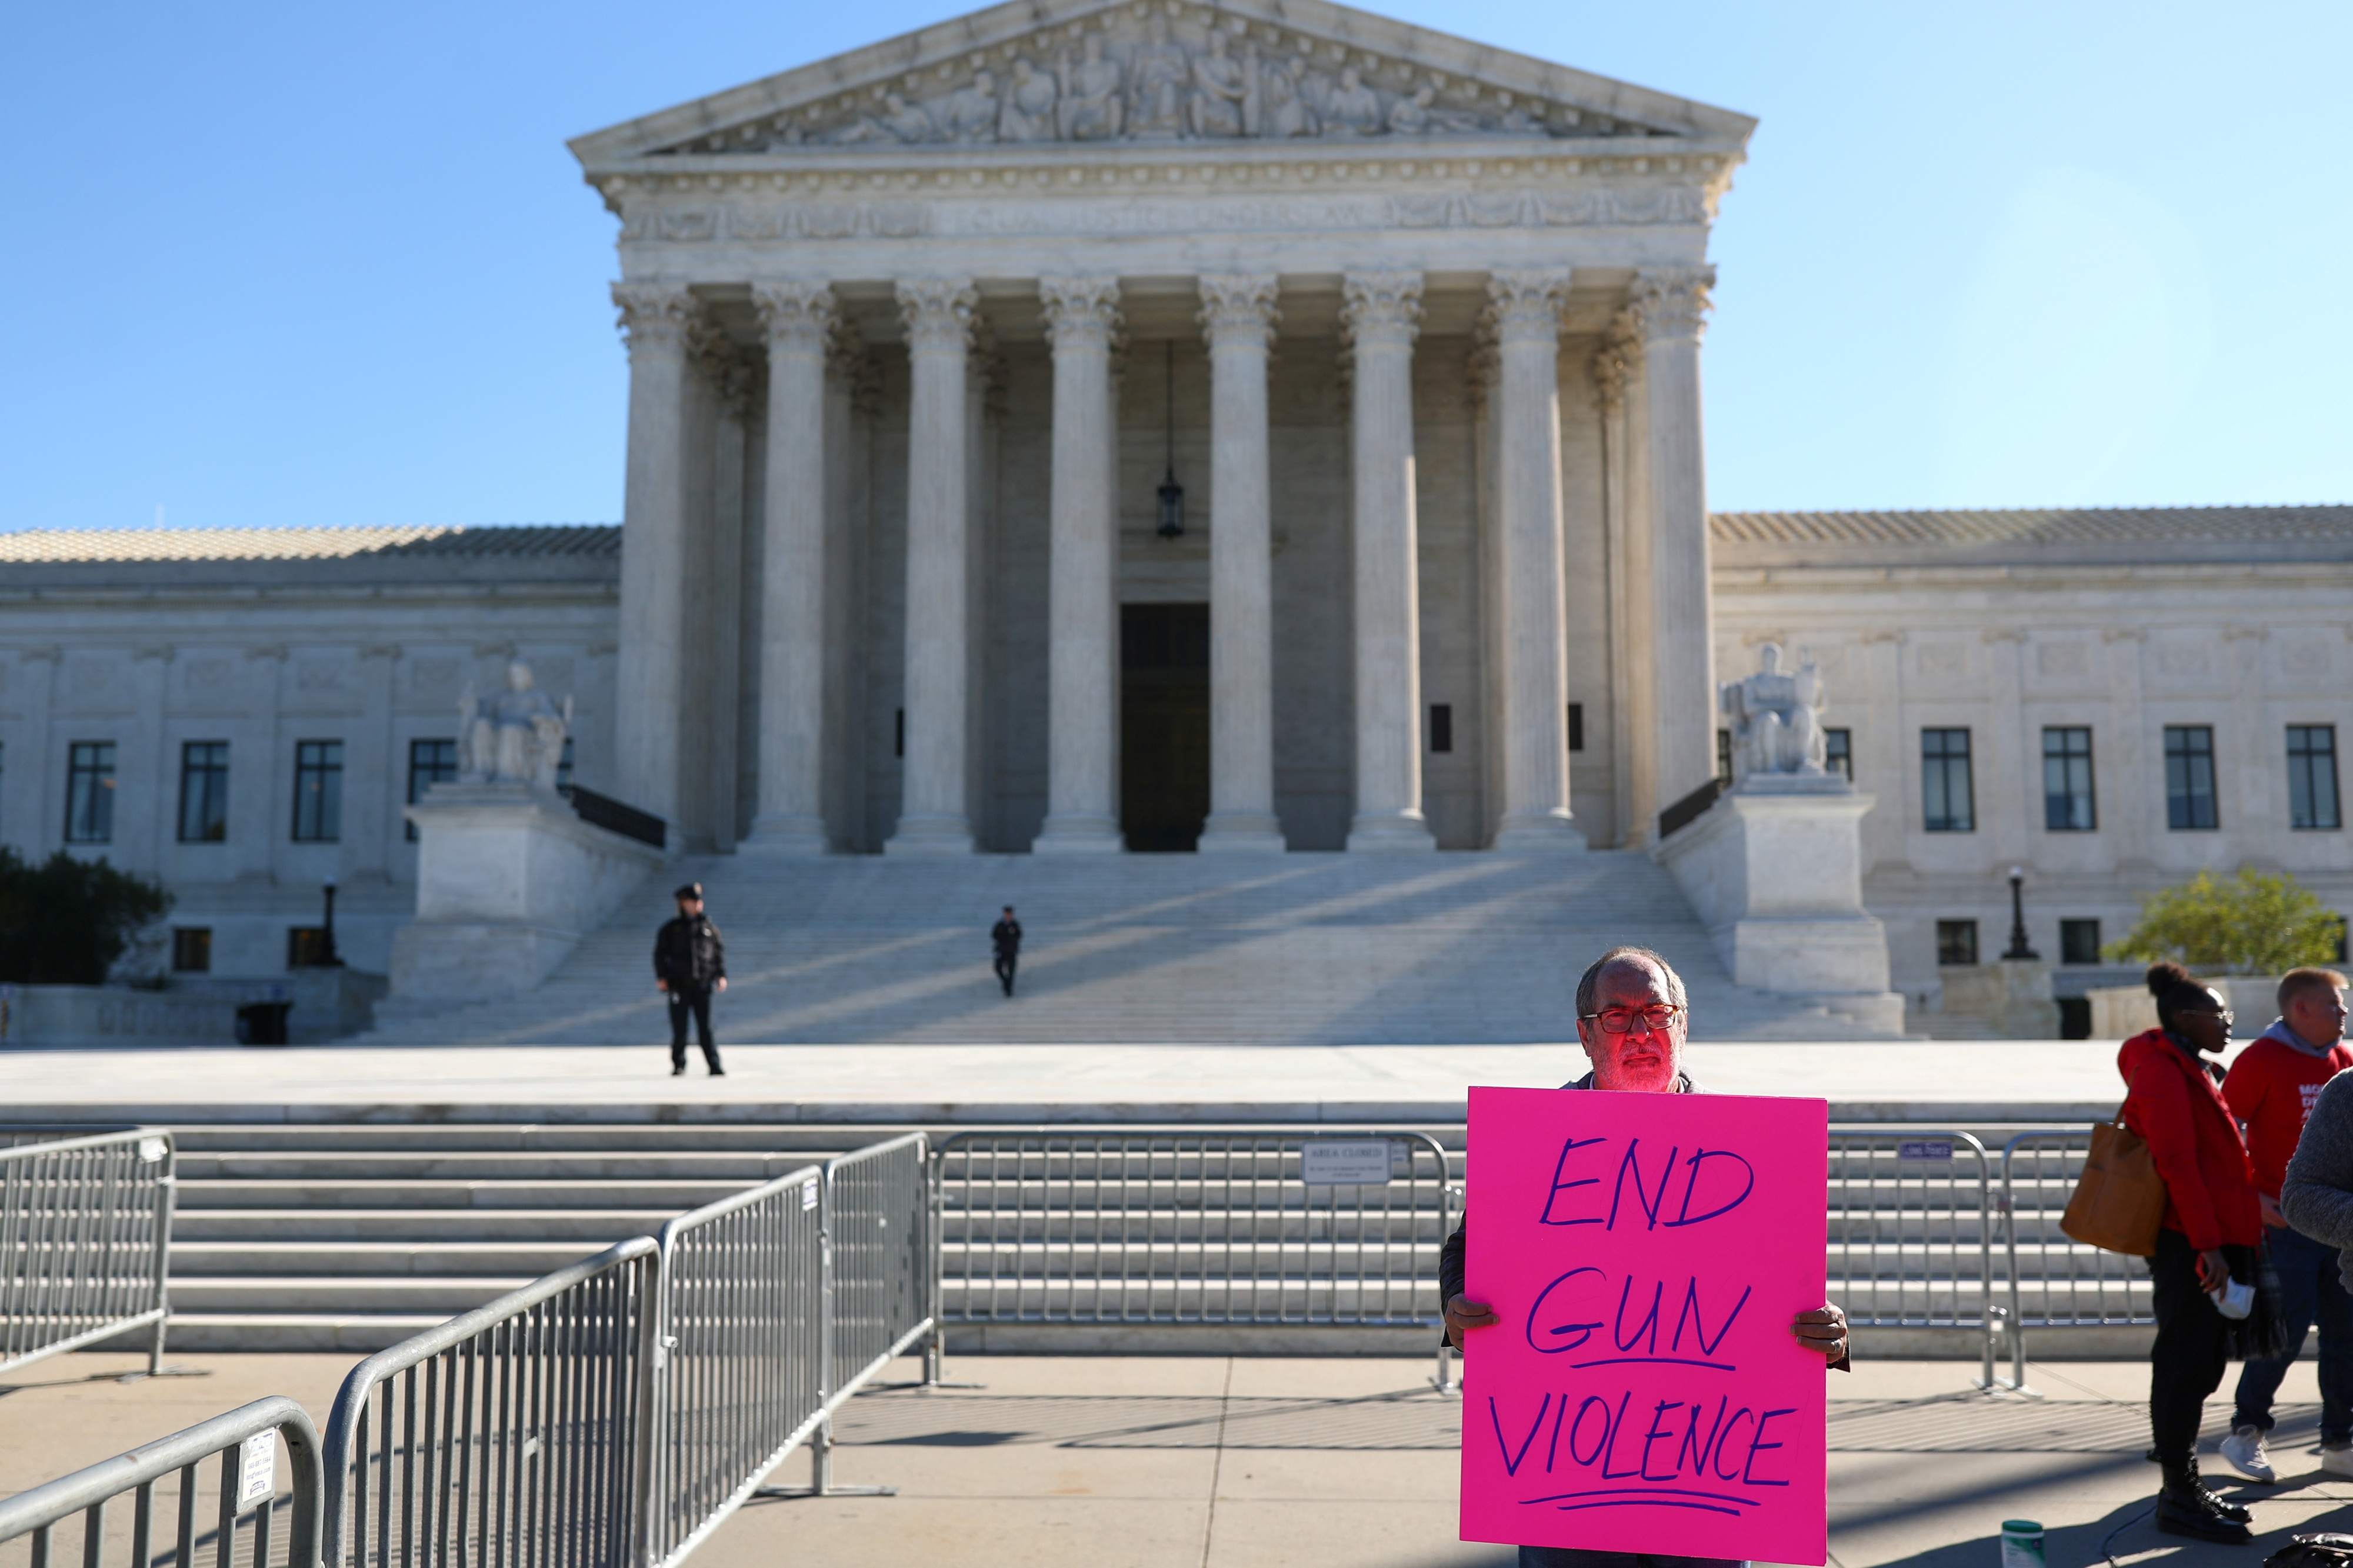 Reverend Patrick Mahoney stands while displaying a sign calling for an end to gun violence during a demonstration at the U.S. Supreme Court in Washington, U.S., November 3, 2021. REUTERS/Tom Brenner